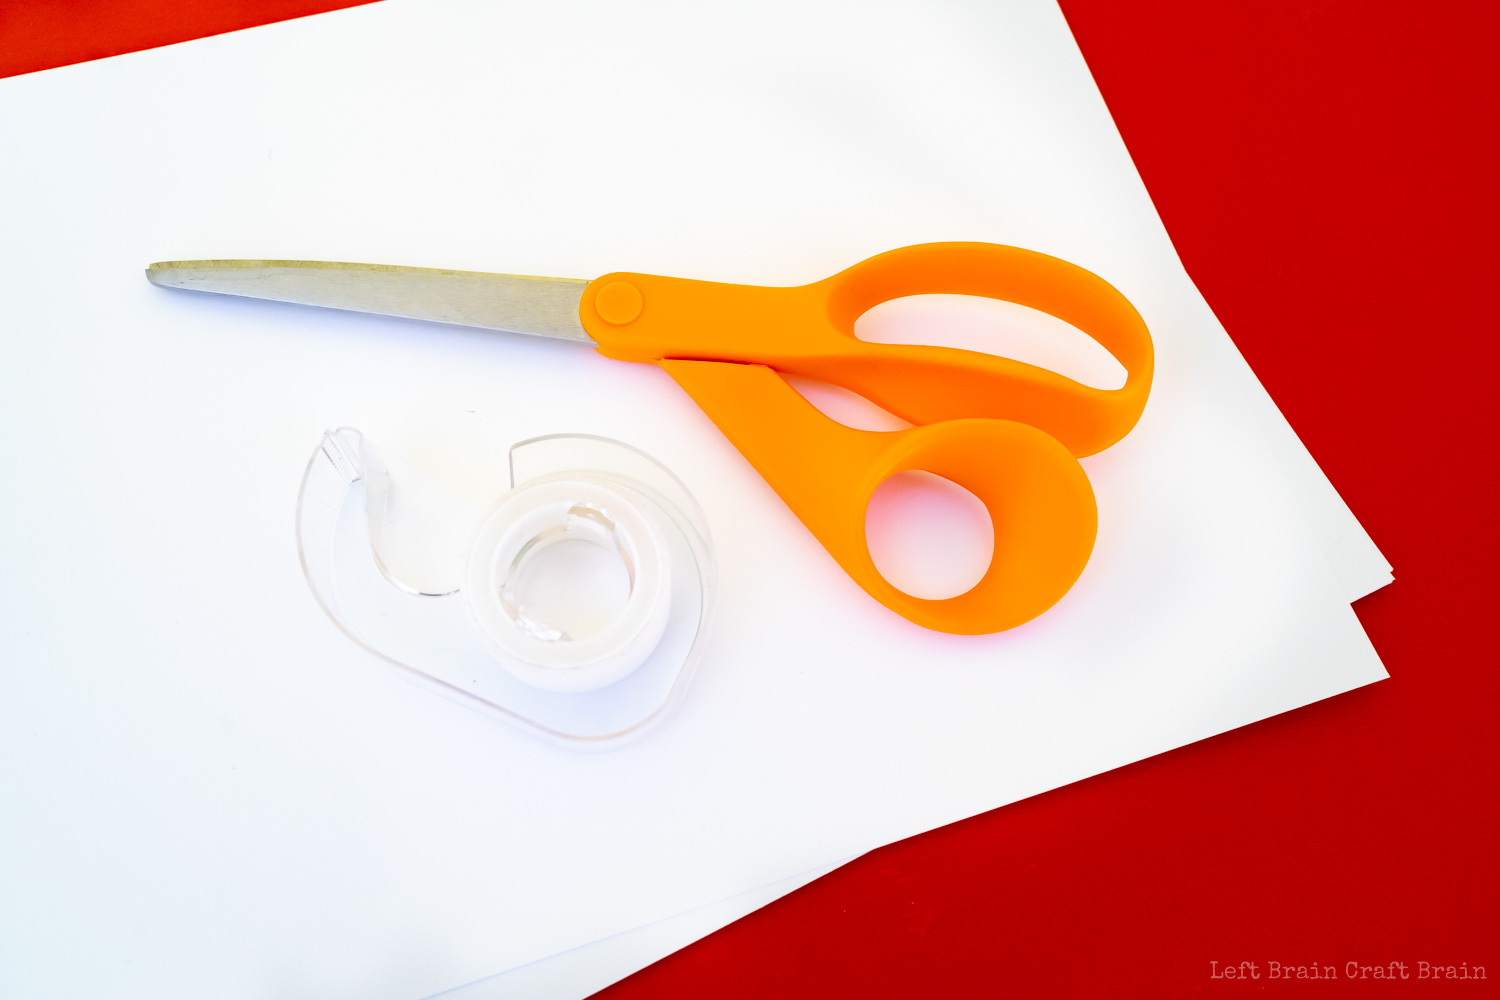 white paper, orange scissors, and tape on a red background